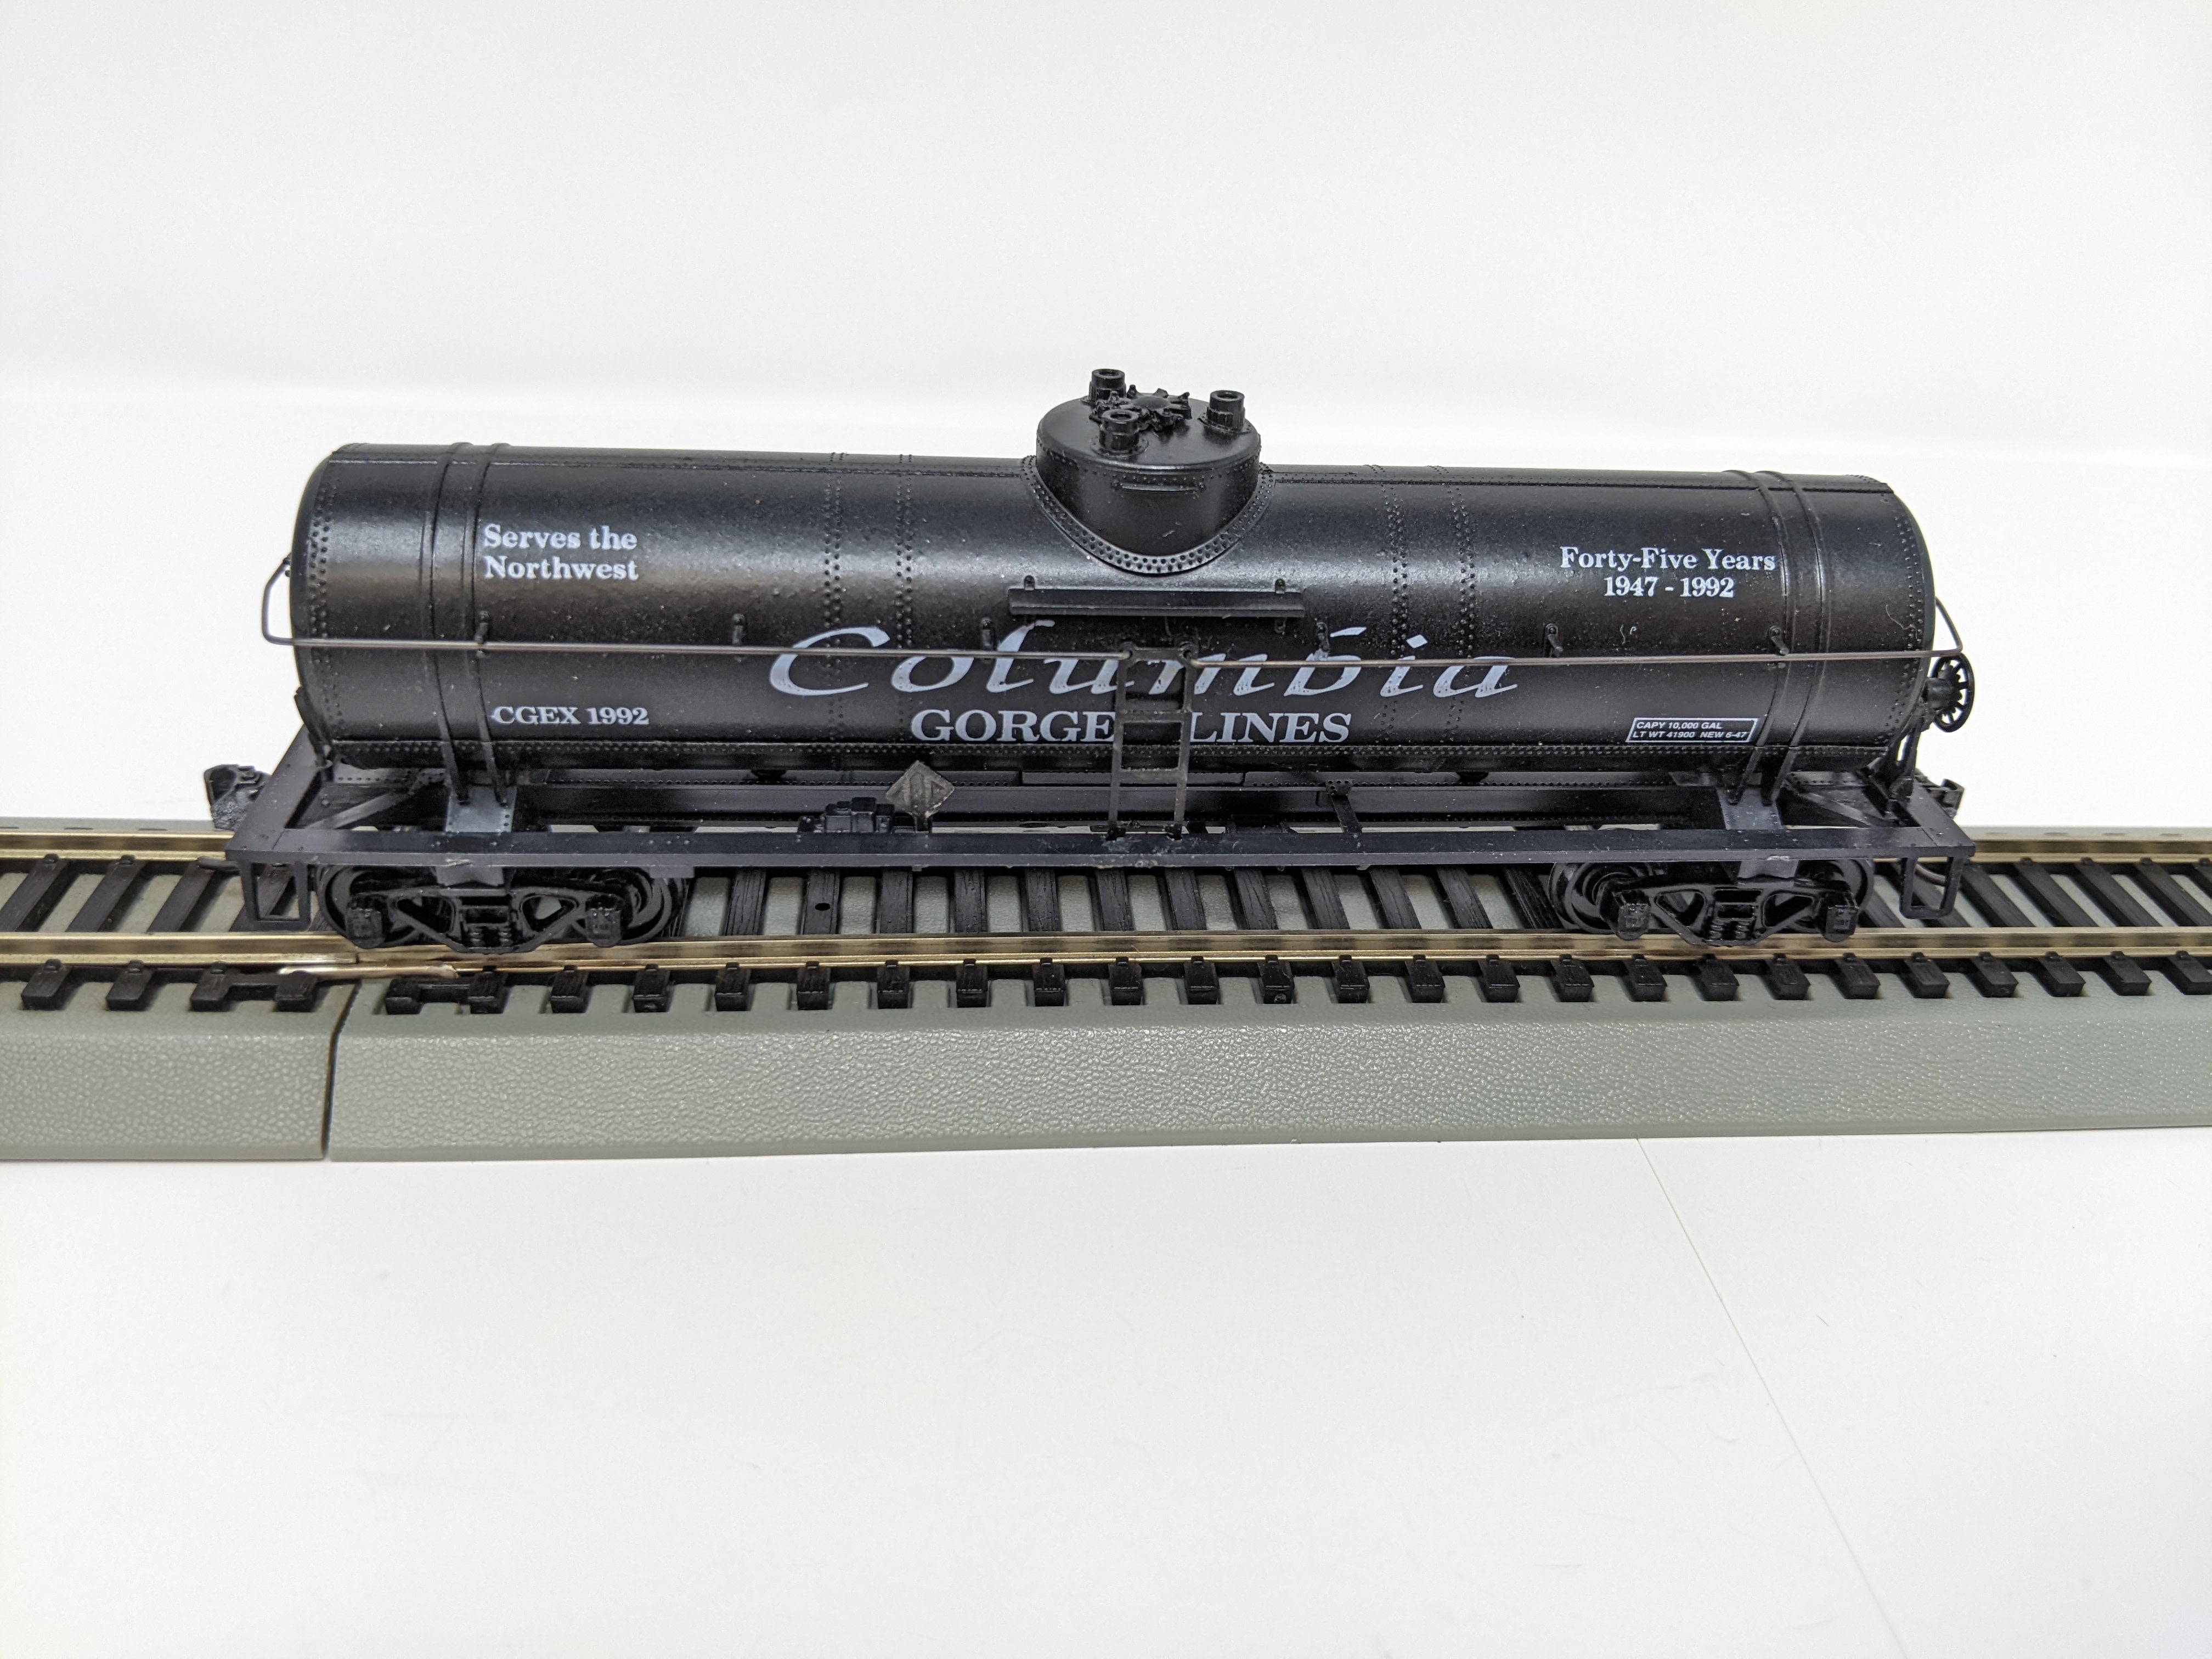 USED Athearn HO Scale, 40' Single Dome Tank Car, Columbia Gorge Lines CGEX #1992